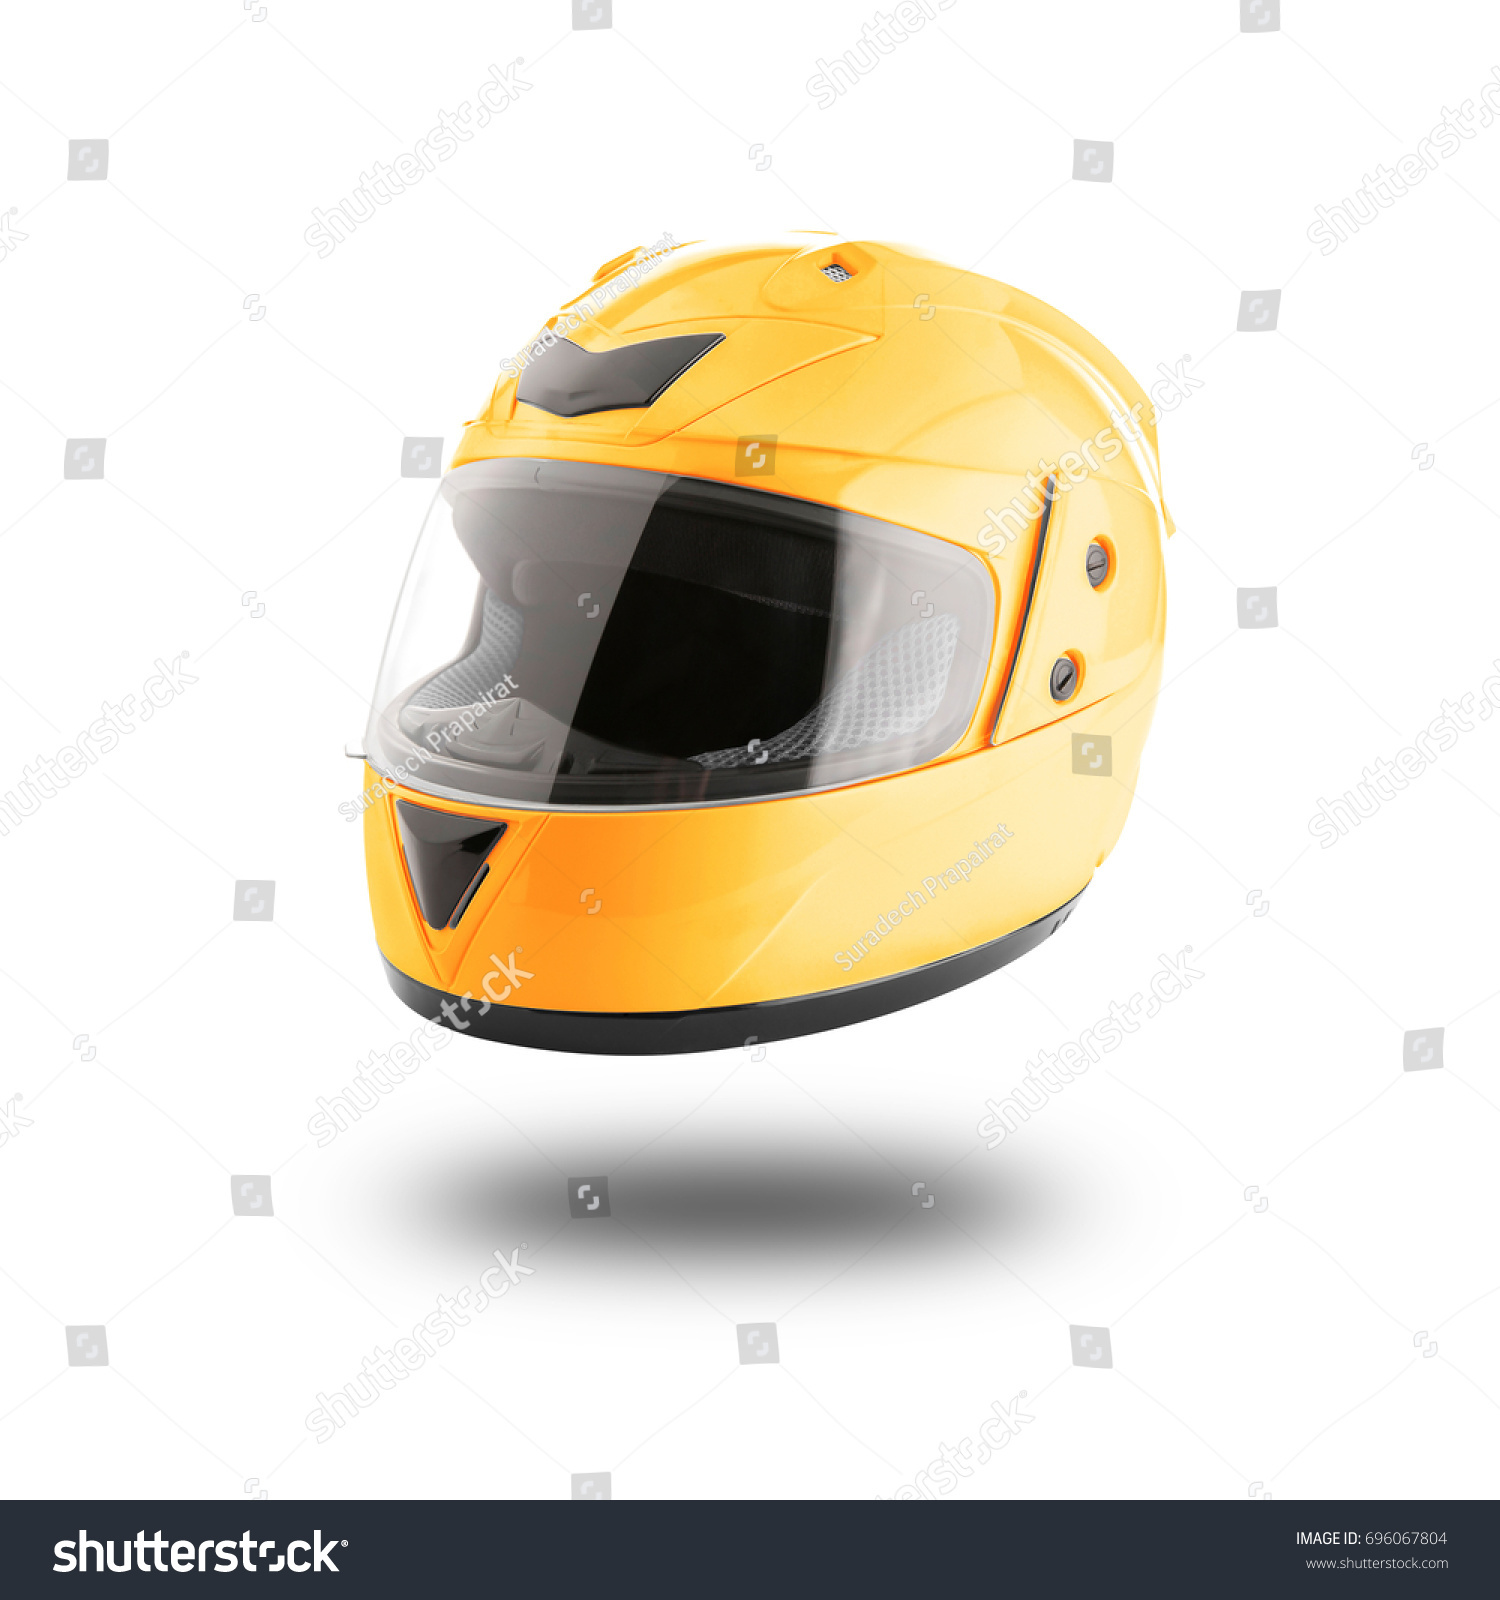 Motorcycle helmet over isolate on white background with clipping path

 #696067804